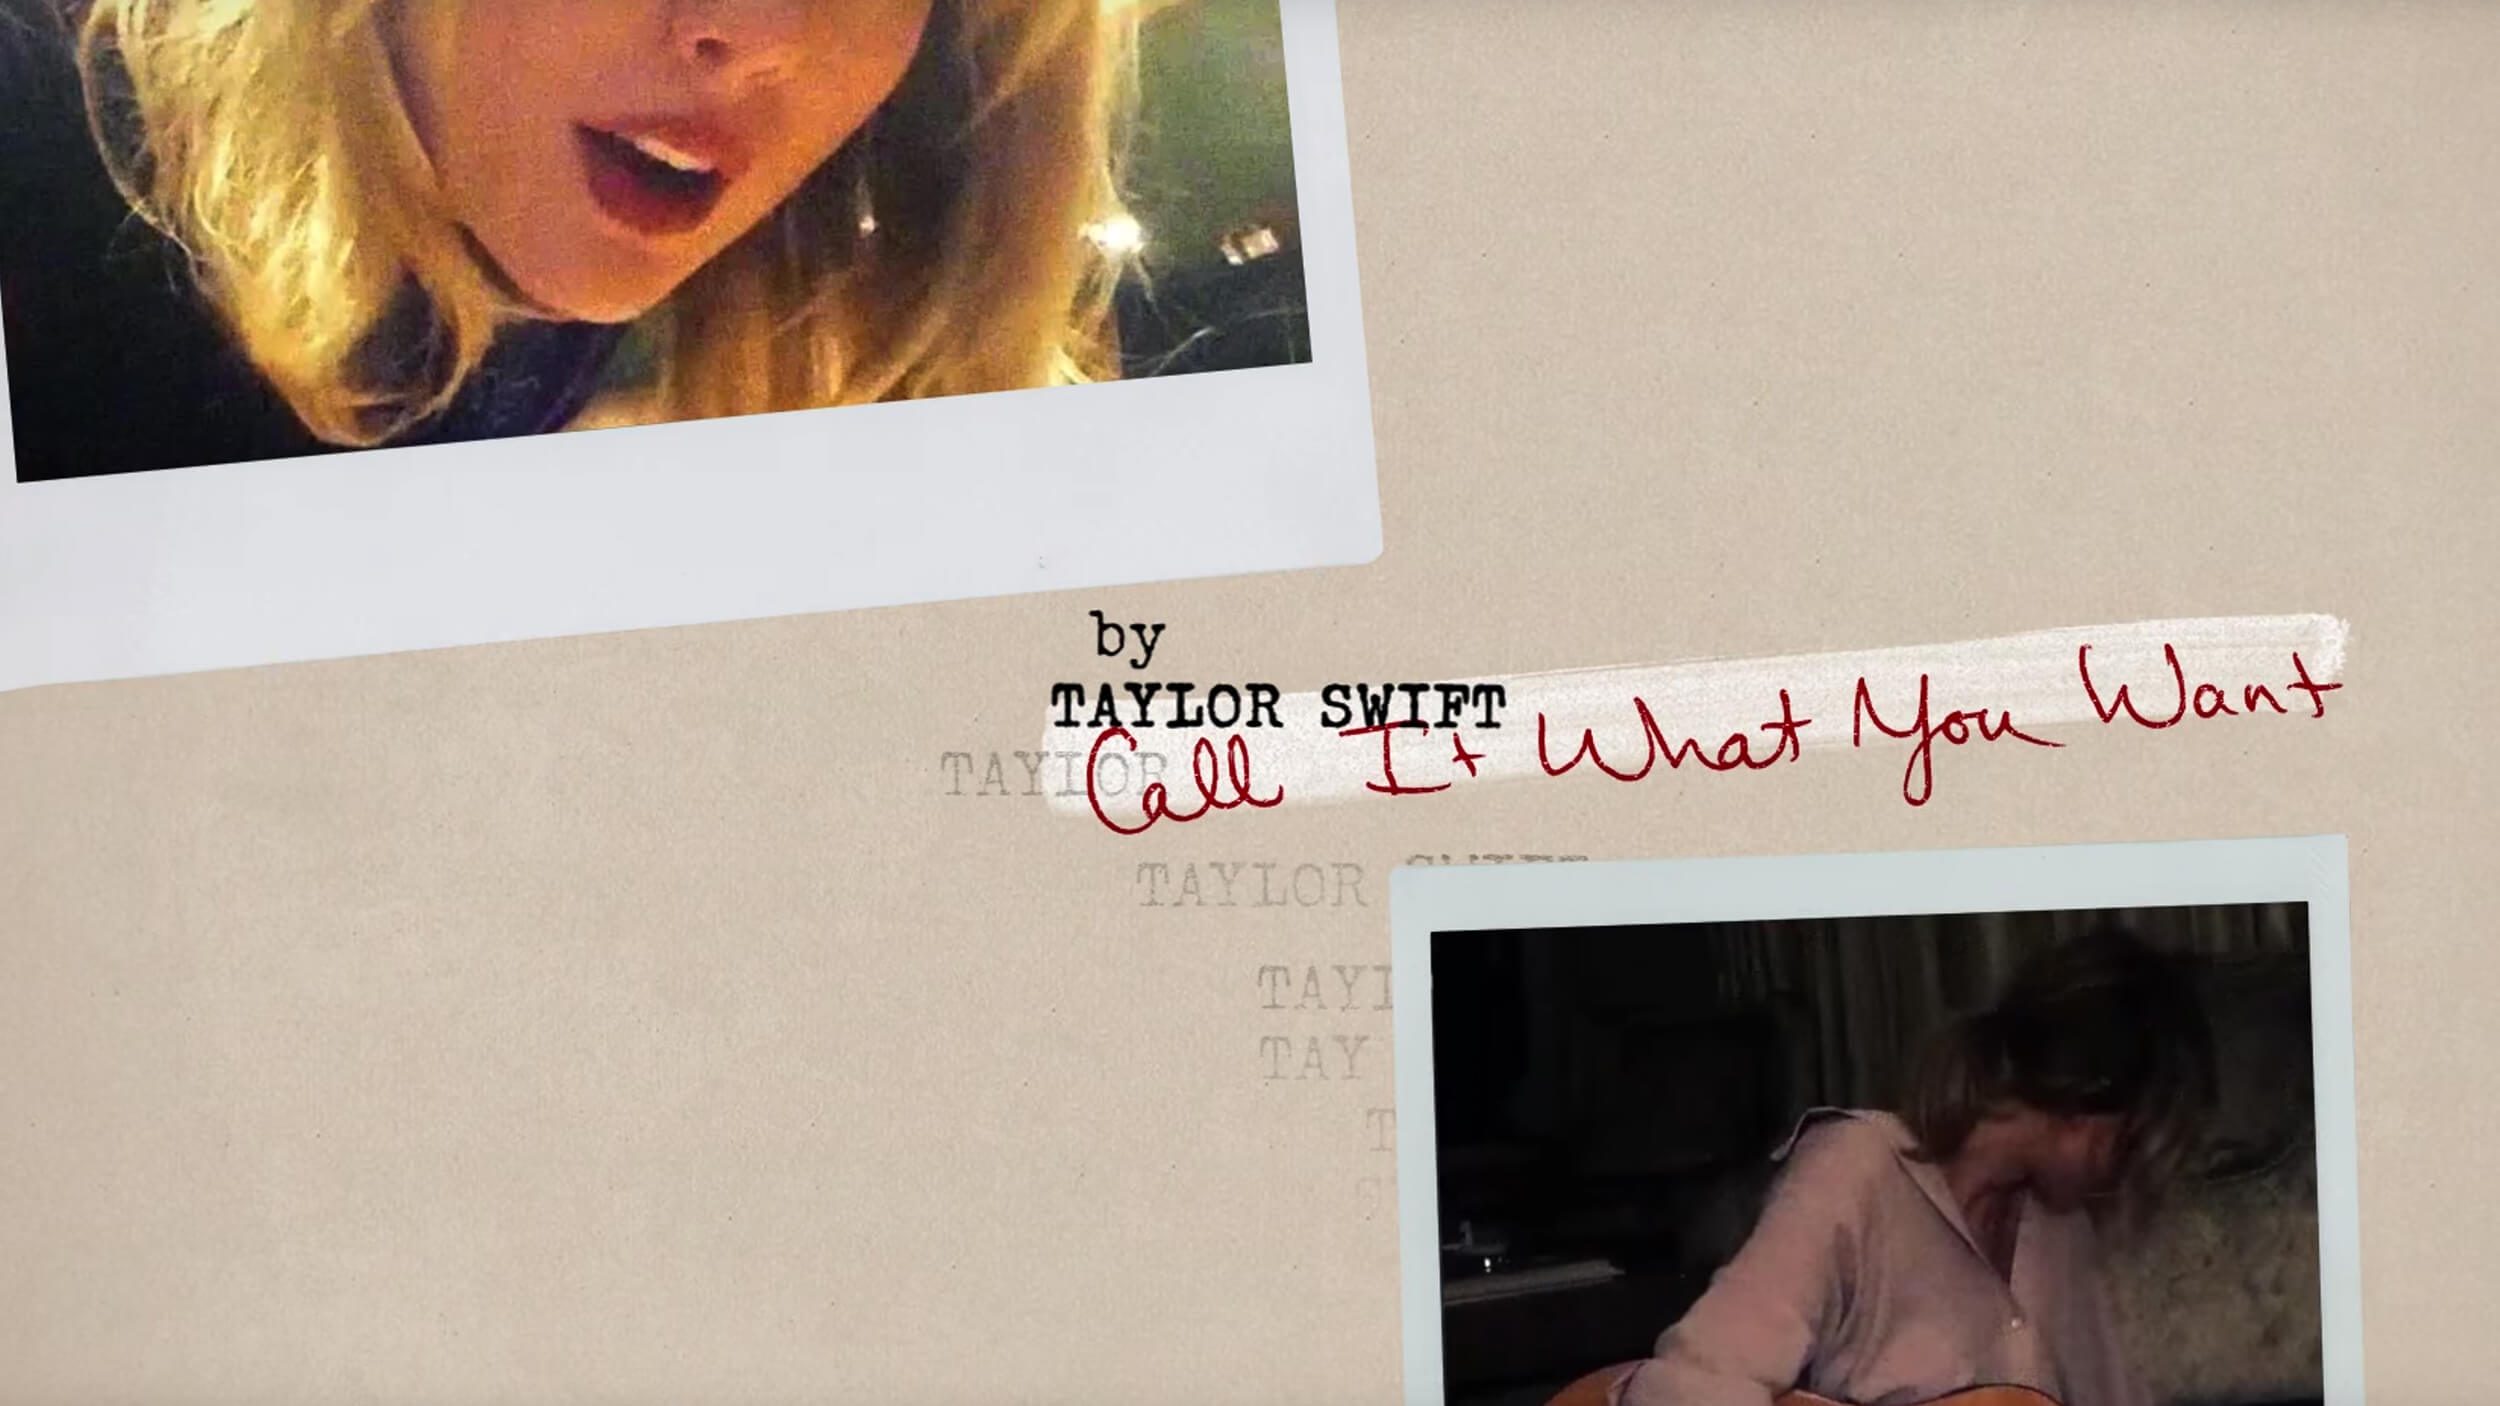 tumbnail video still from Taylor Swift's Call It What You Want lyric video